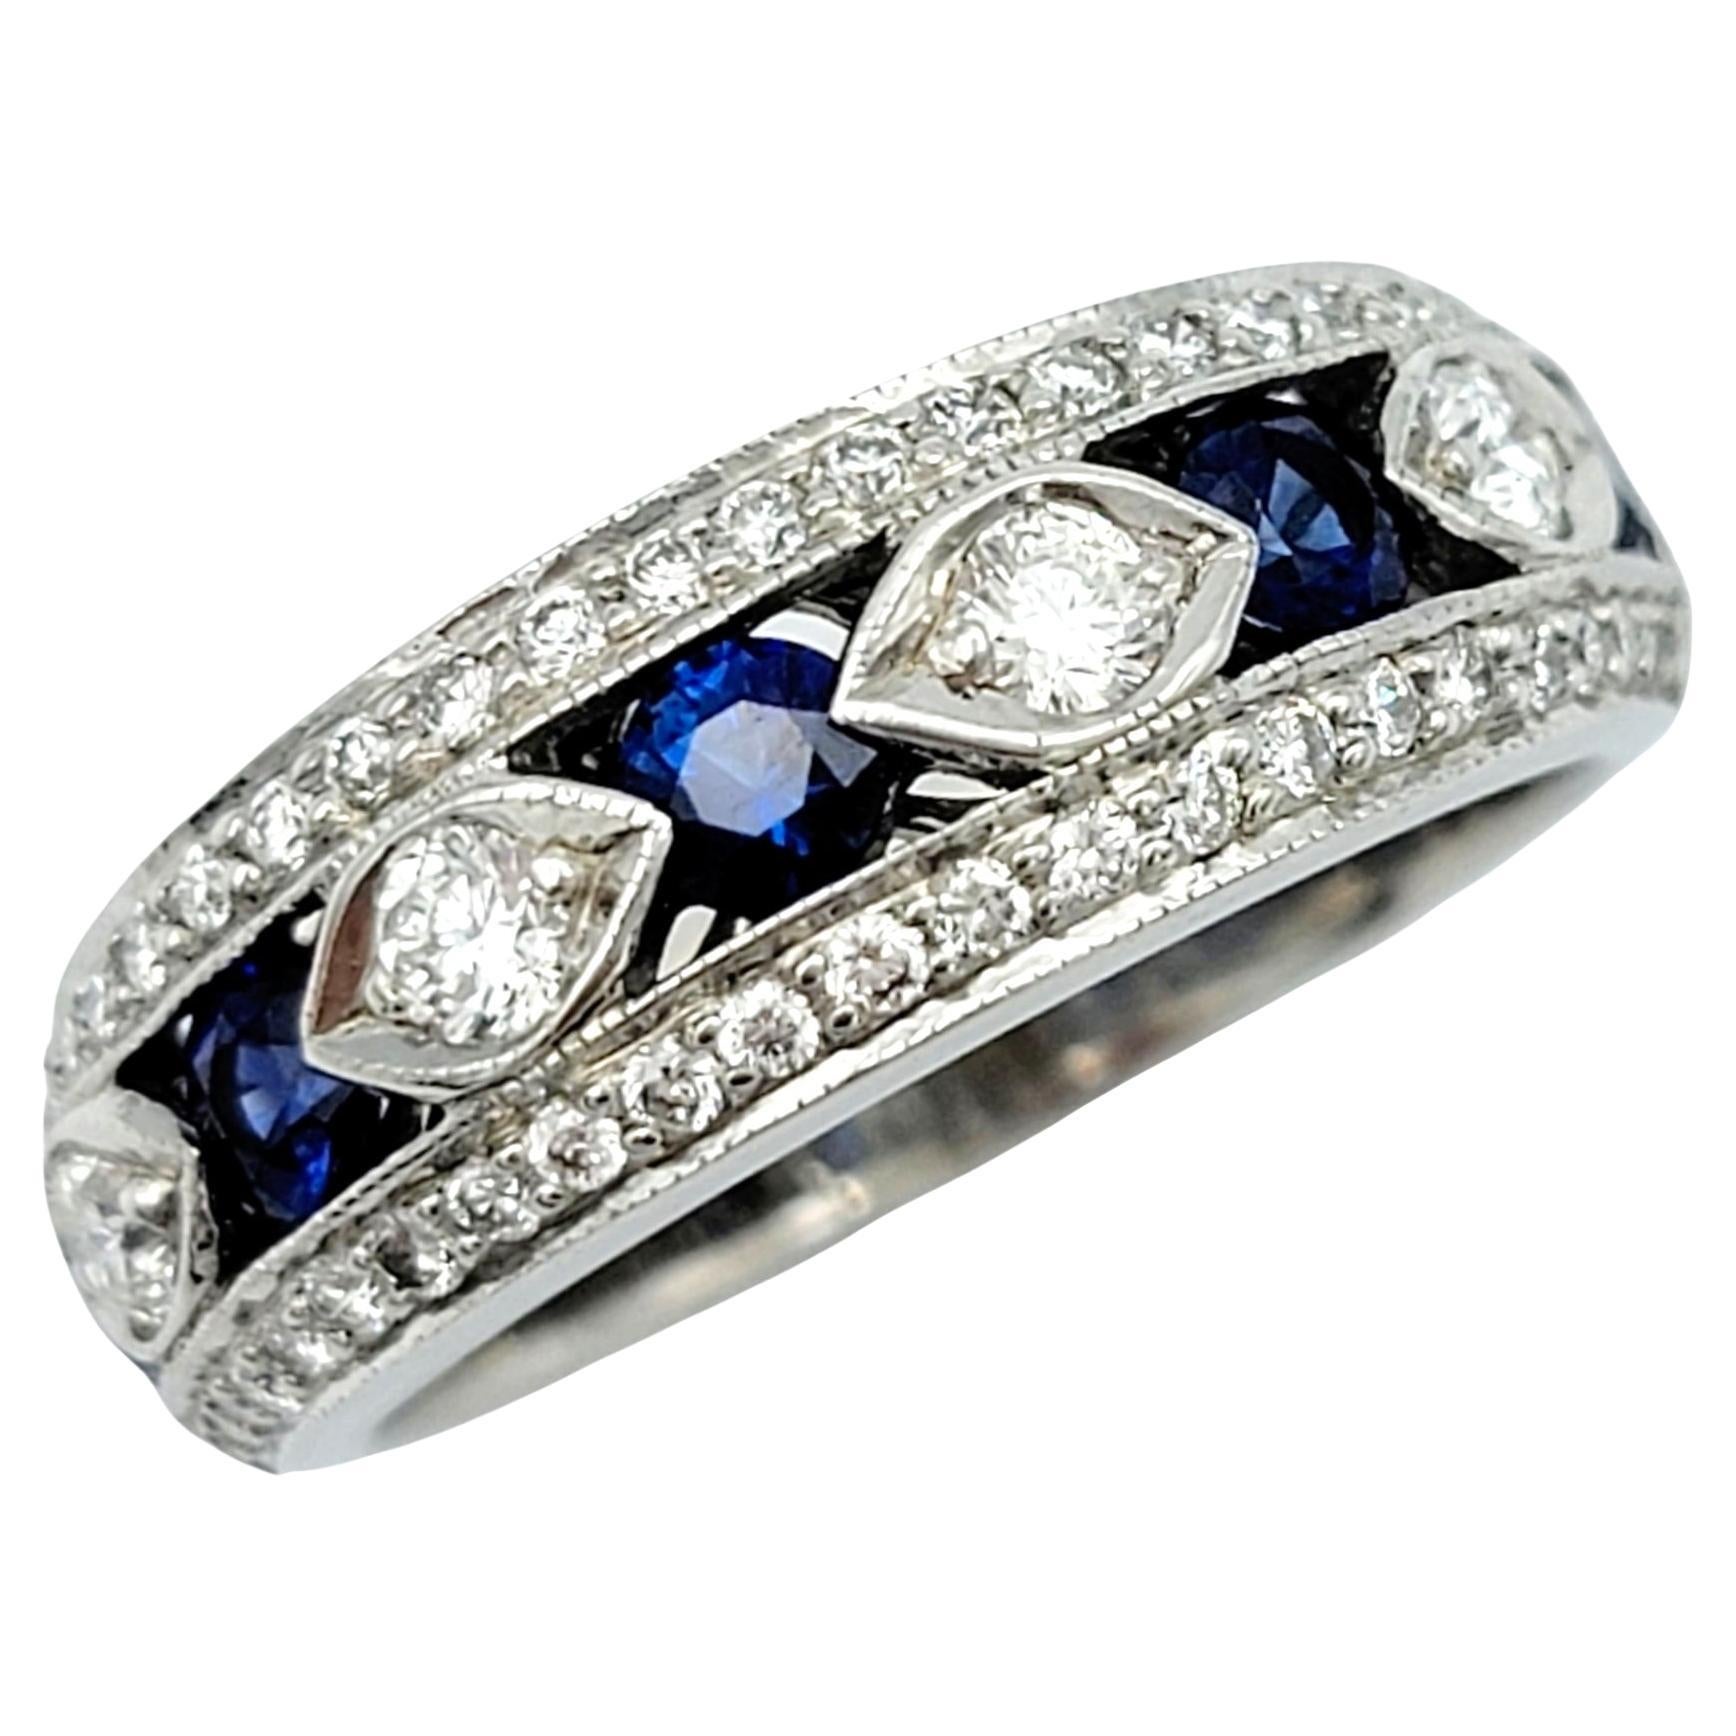 Ring size: 5 

This gorgeous 18 karat white gold band ring is a testament to refined elegance and intricate design. The focus of this captivating ring features a mesmerizing alternating pattern of brilliant blue sapphires and pristine white